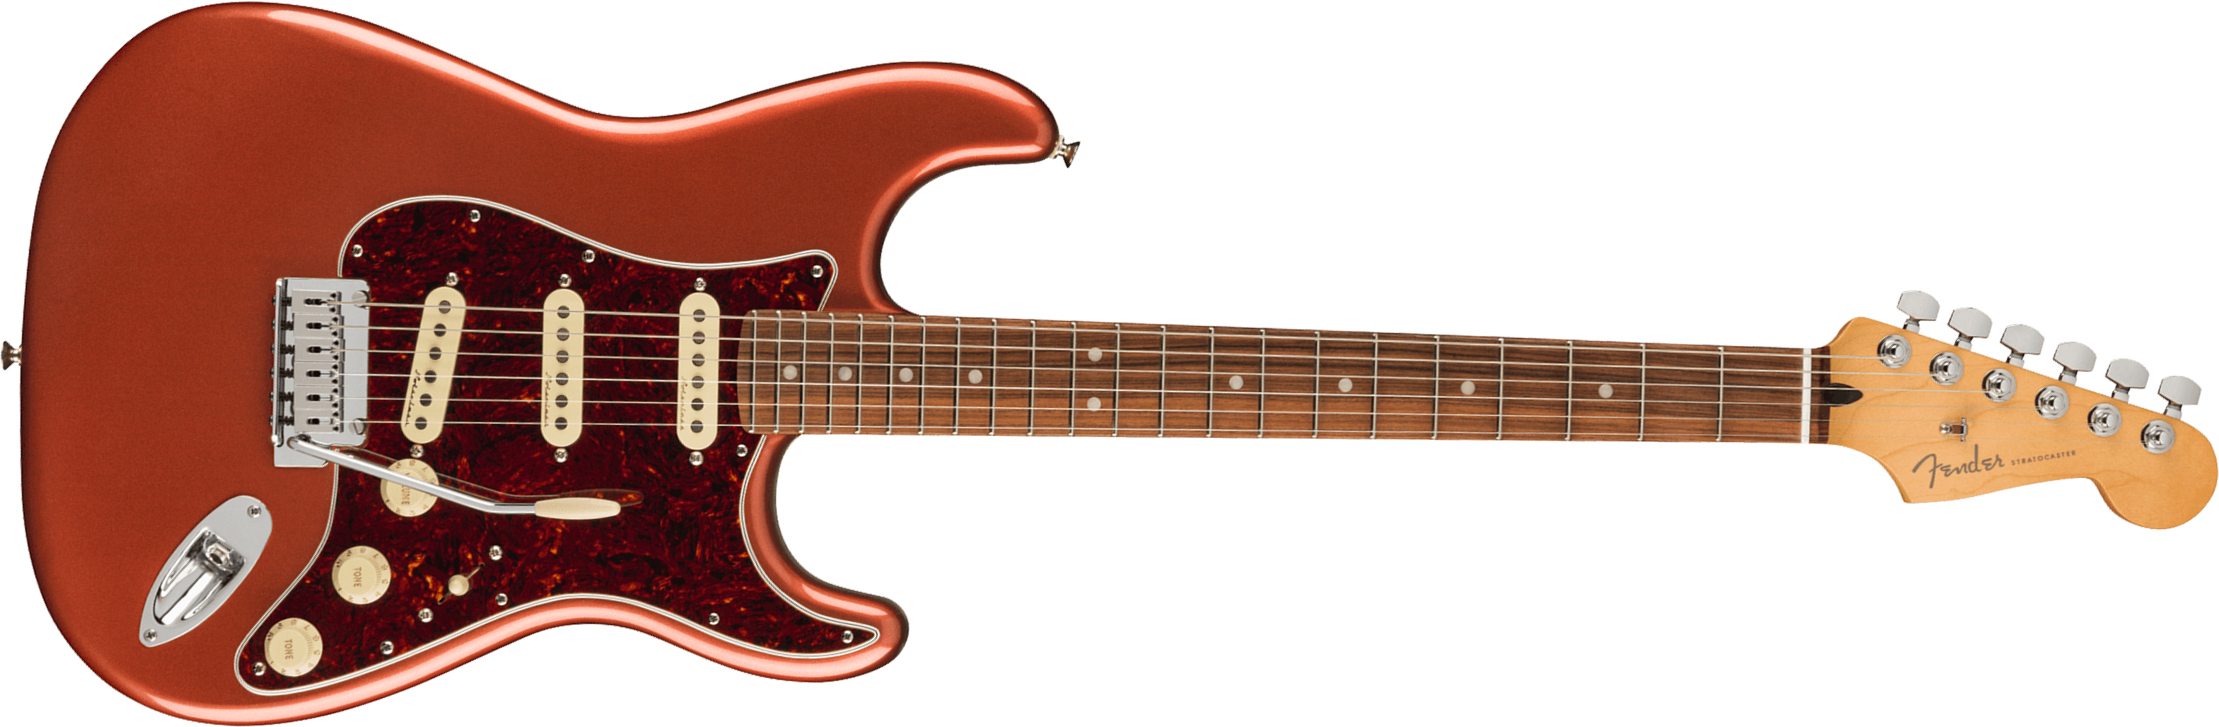 Fender Strat Player Plus Mex 3s Trem Pf - Aged Candy Apple Red - E-Gitarre in Str-Form - Main picture